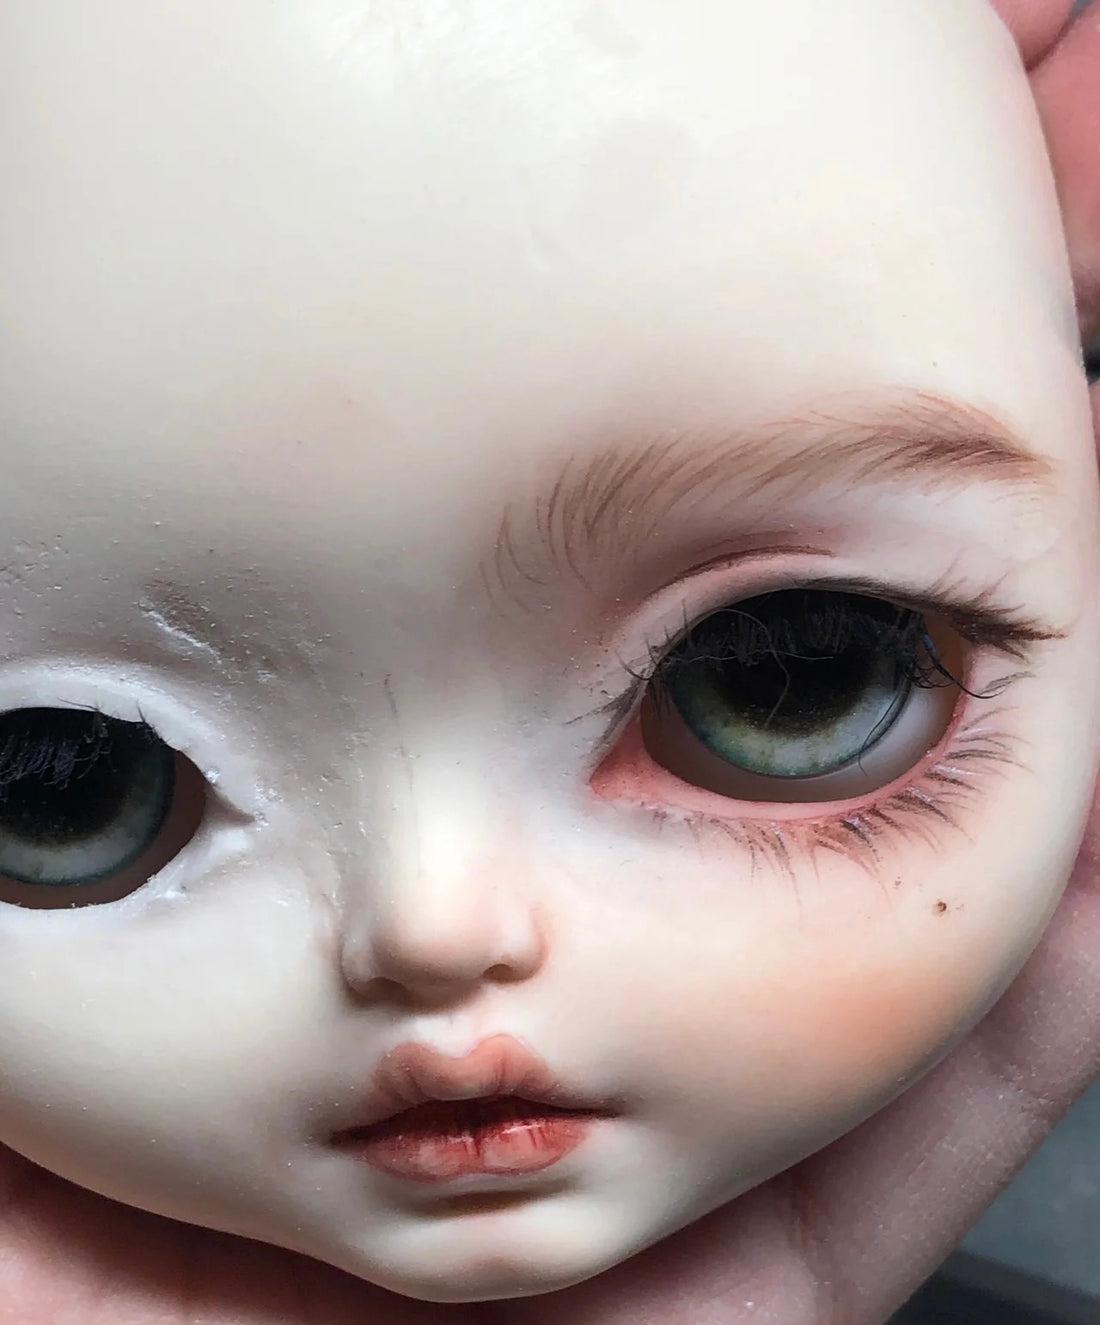 How to maintain for dolls?